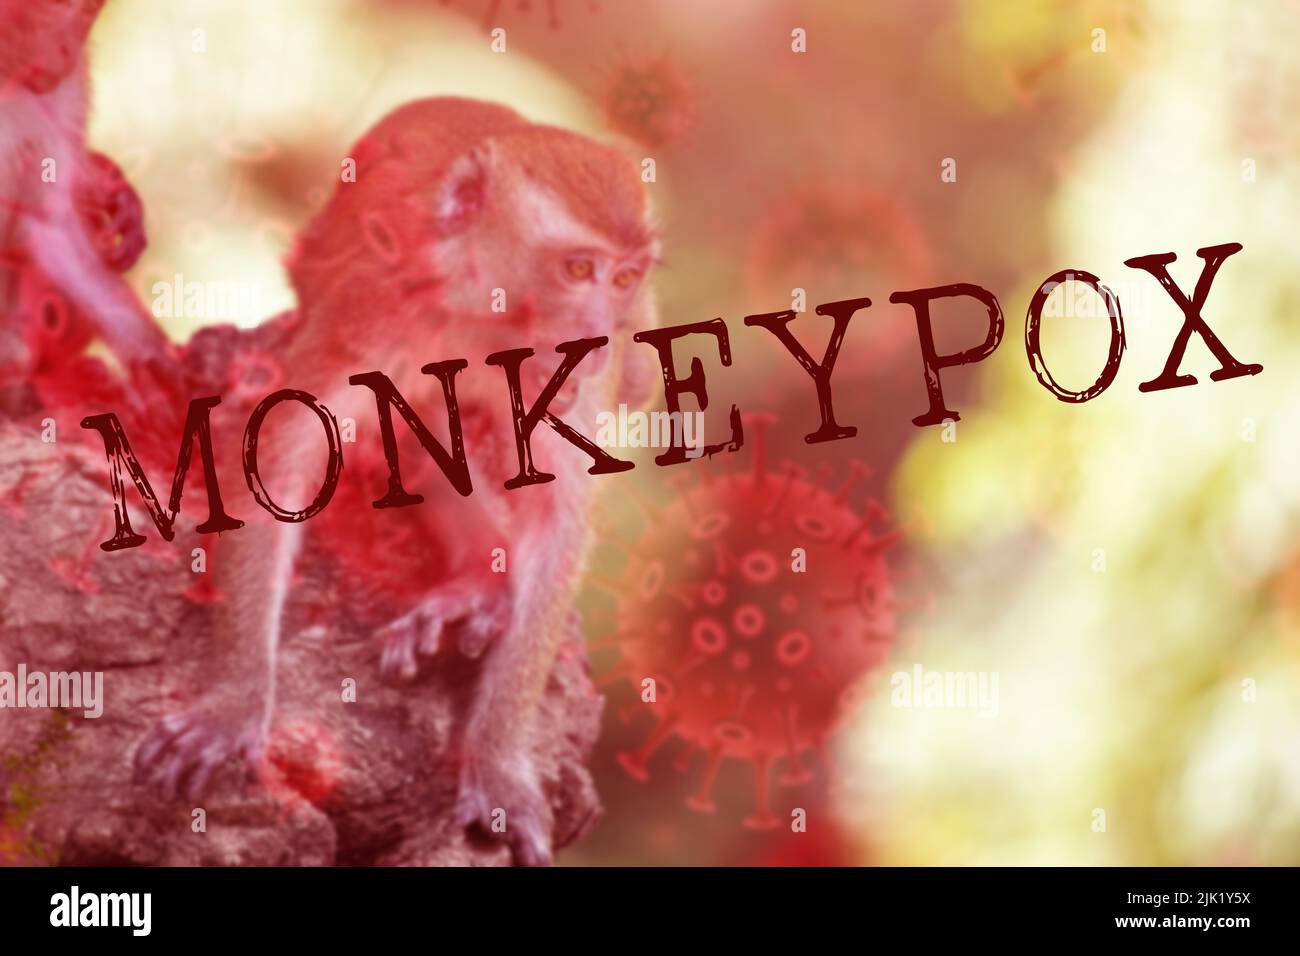 Monkeypox diseas outbreak concept. Monkeypox is a viral zoonotic disease, transmitted to humans from animals. Stock Photo